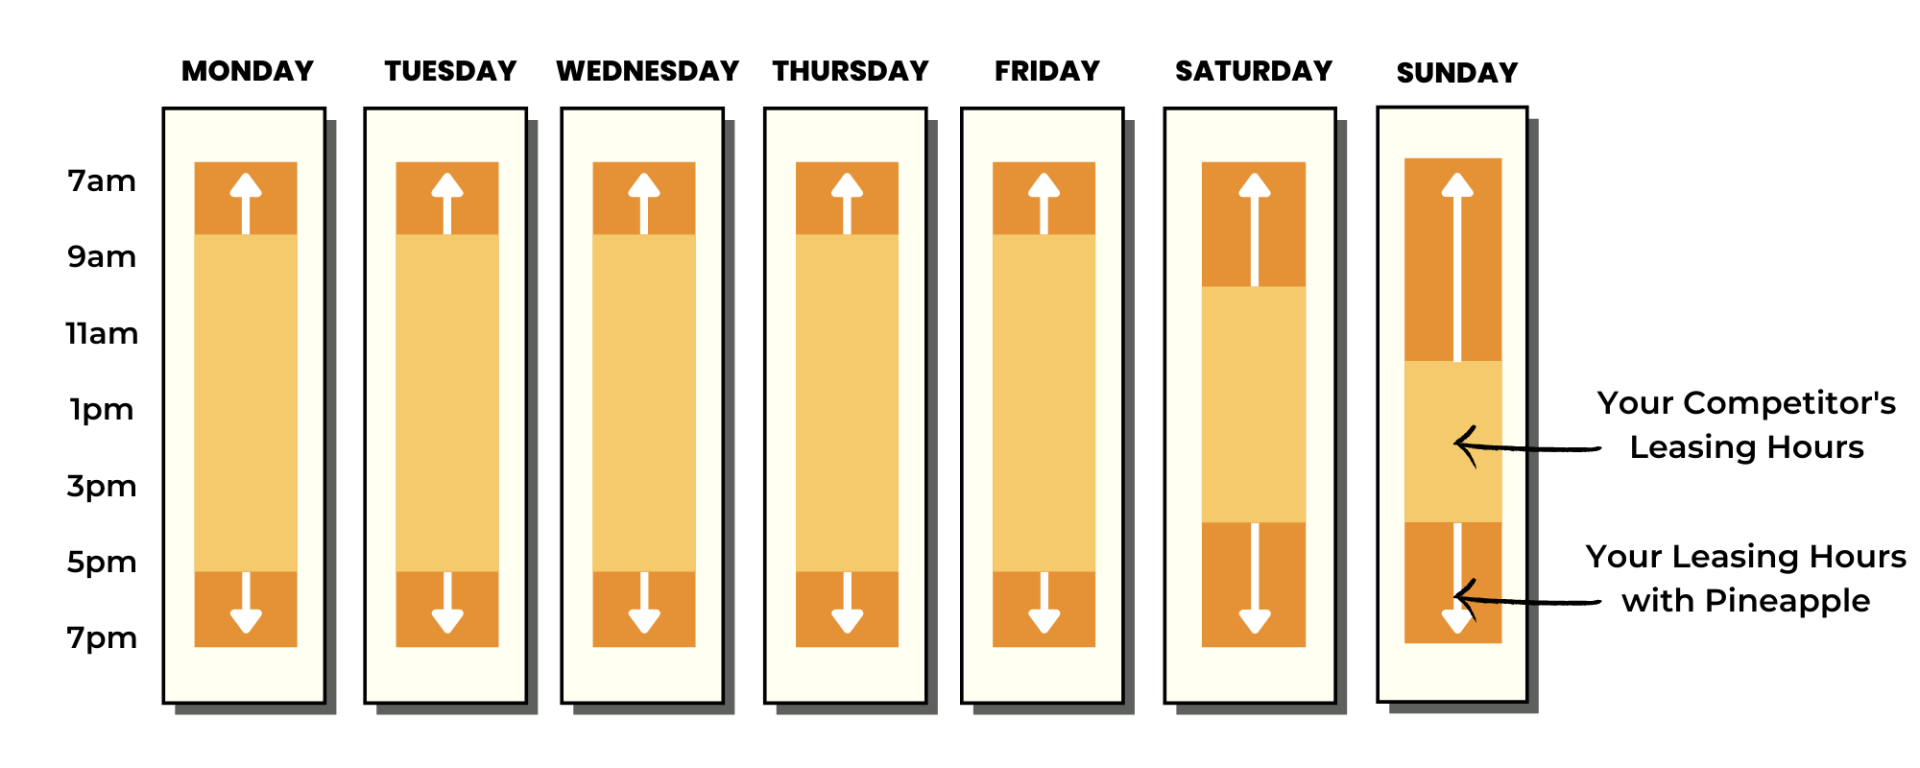 A graphic showing the length of each day of the week